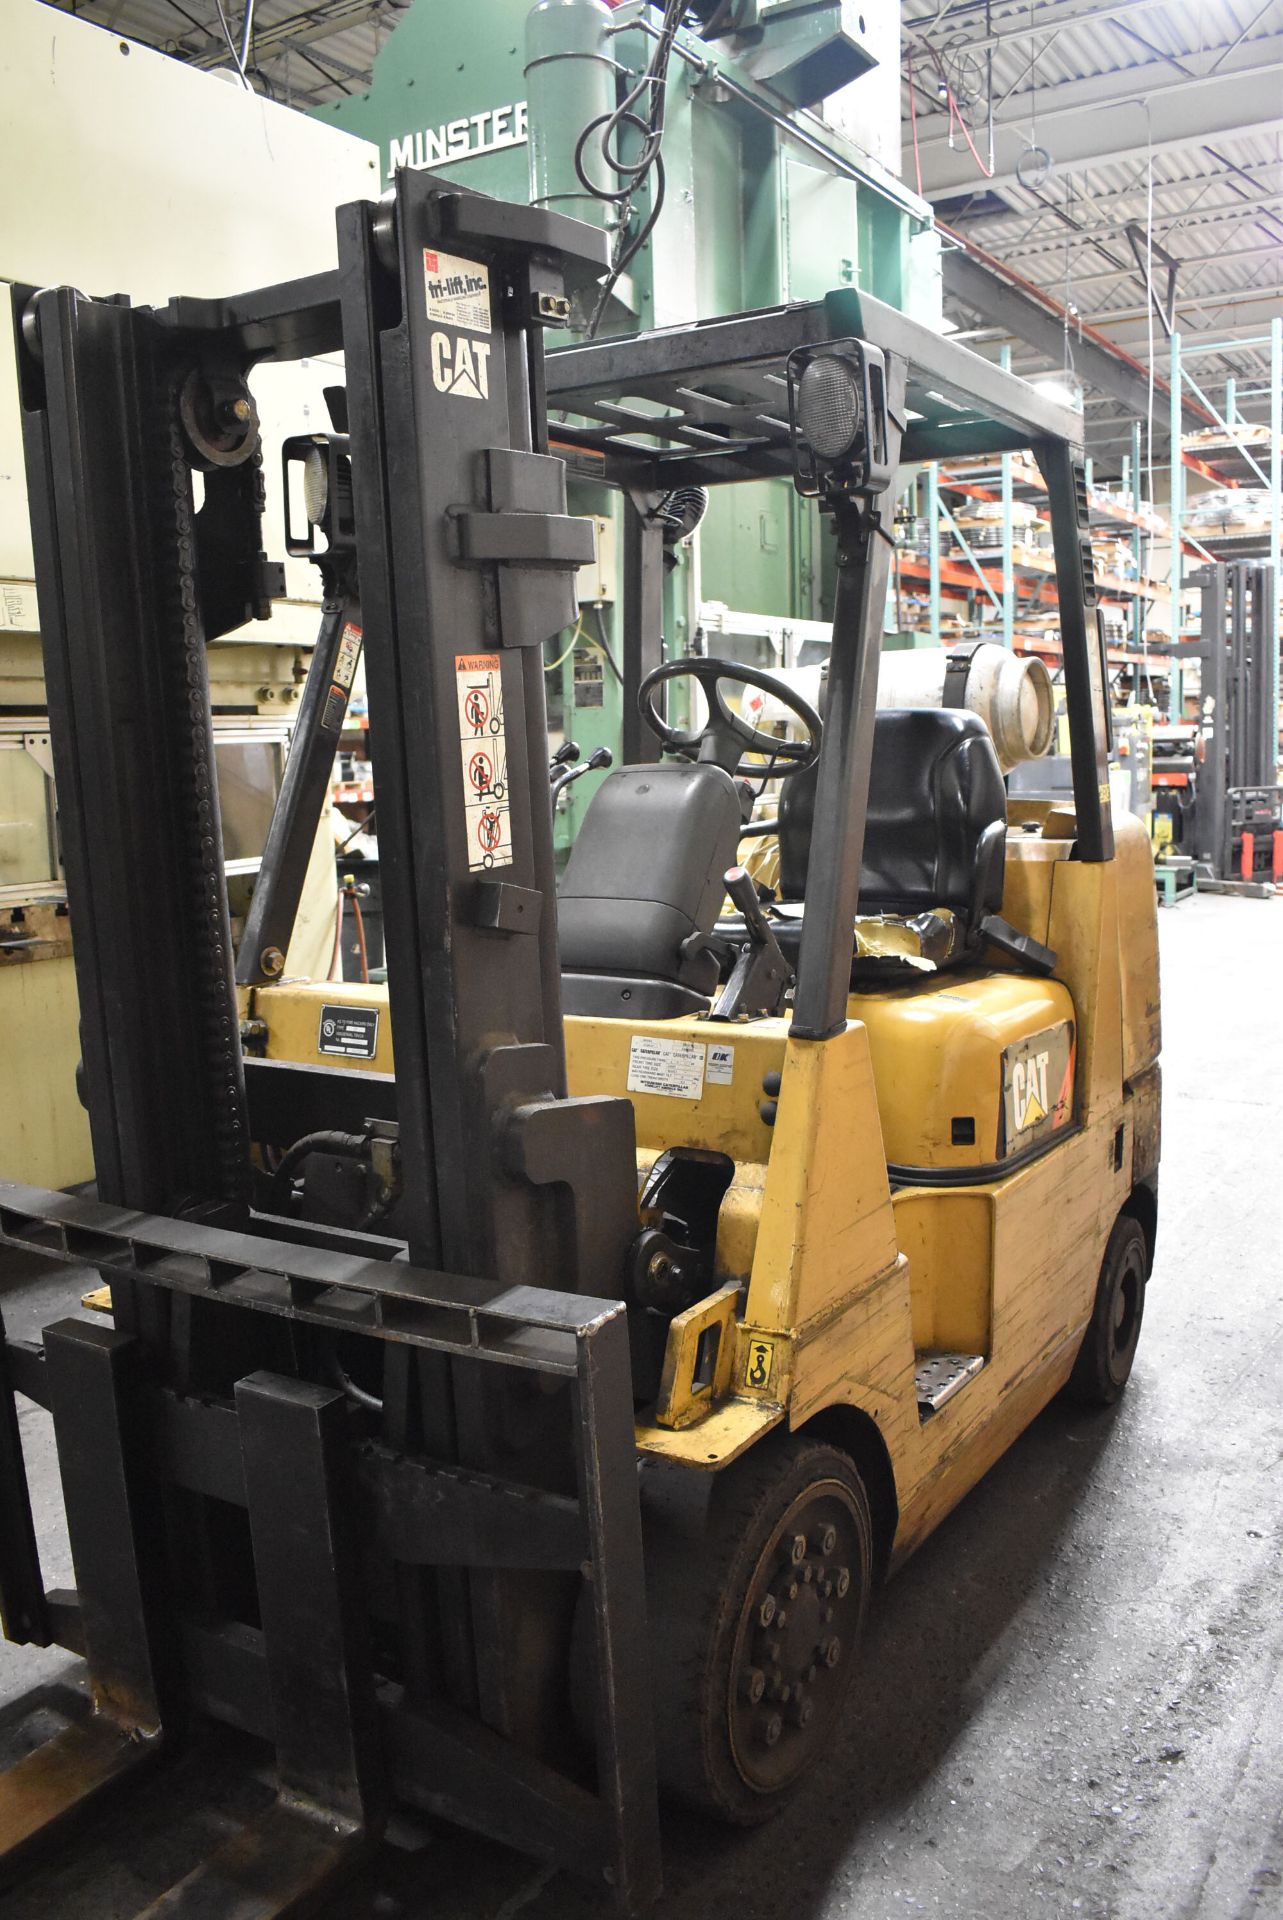 CATERPILLAR GC35K-LP 7,000 LB. LPG FORKLIFT WITH 120" MAX. LIFT HEIGHT, 2-STAGE MAST, SOLID TIRES, - Image 3 of 9